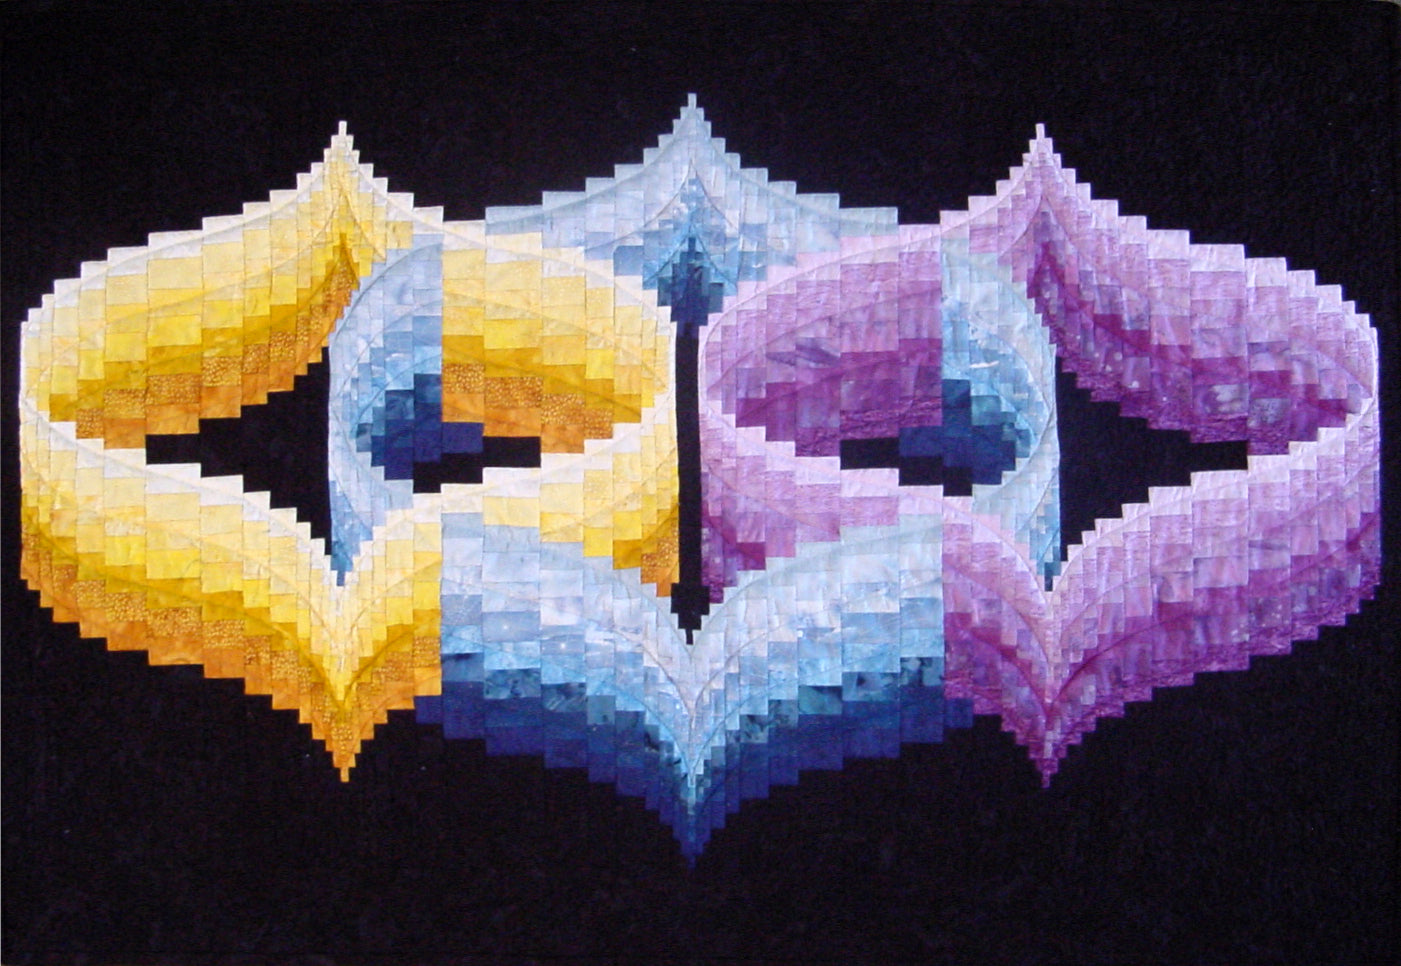 Color Connections is a bargello quilt design by Ruth Blanchet using 3 intertwined colors. Available as a download quilt pattern.